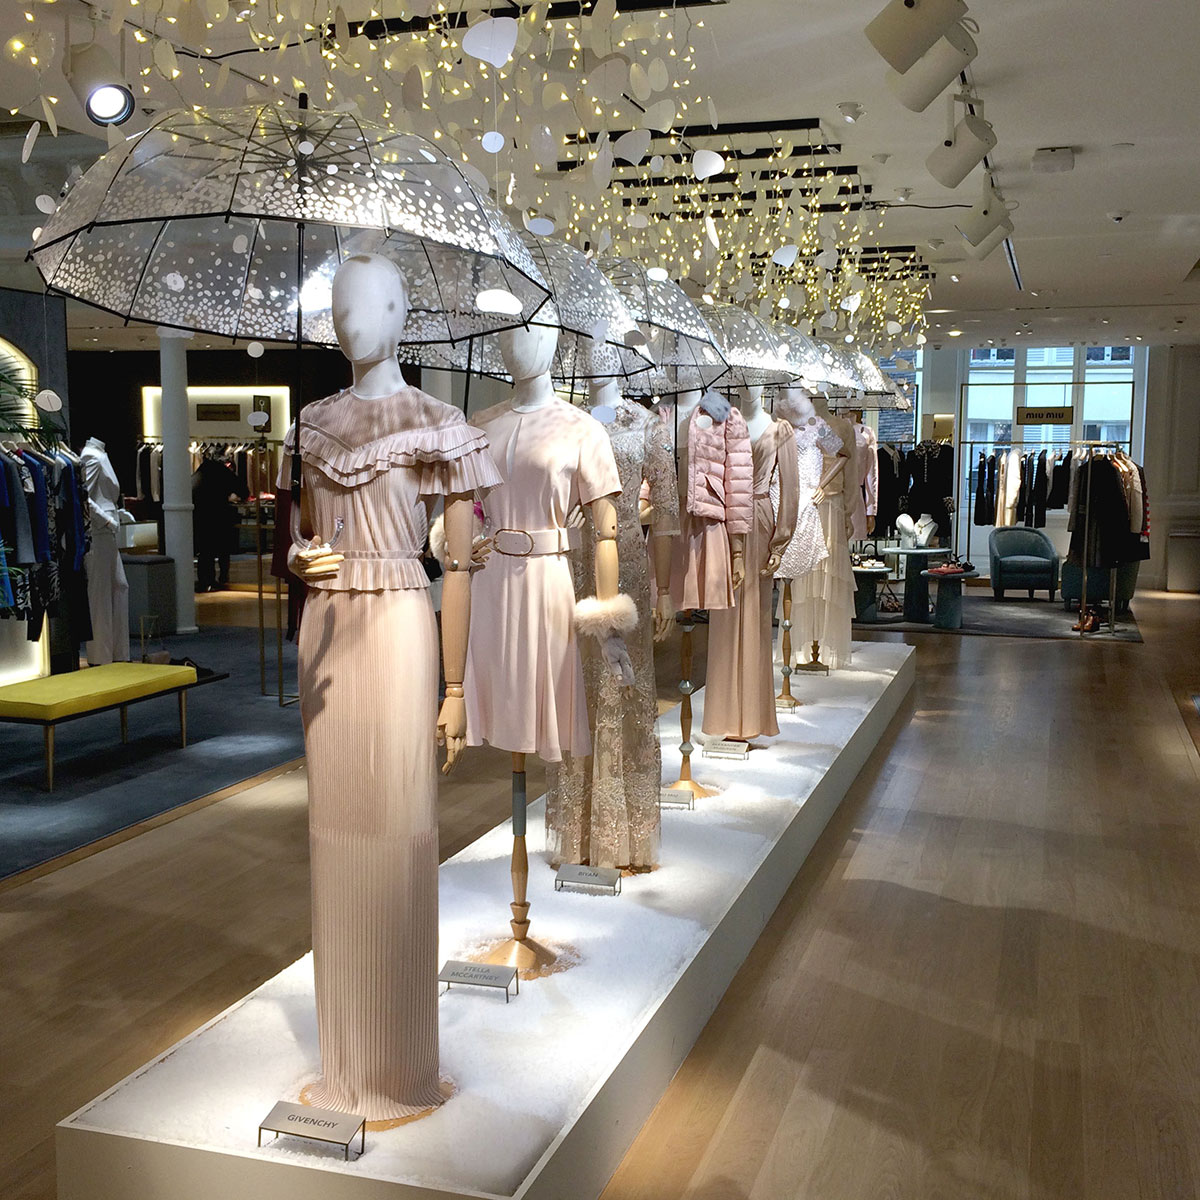 Display snow used in Le Bon Marche by Snow Business